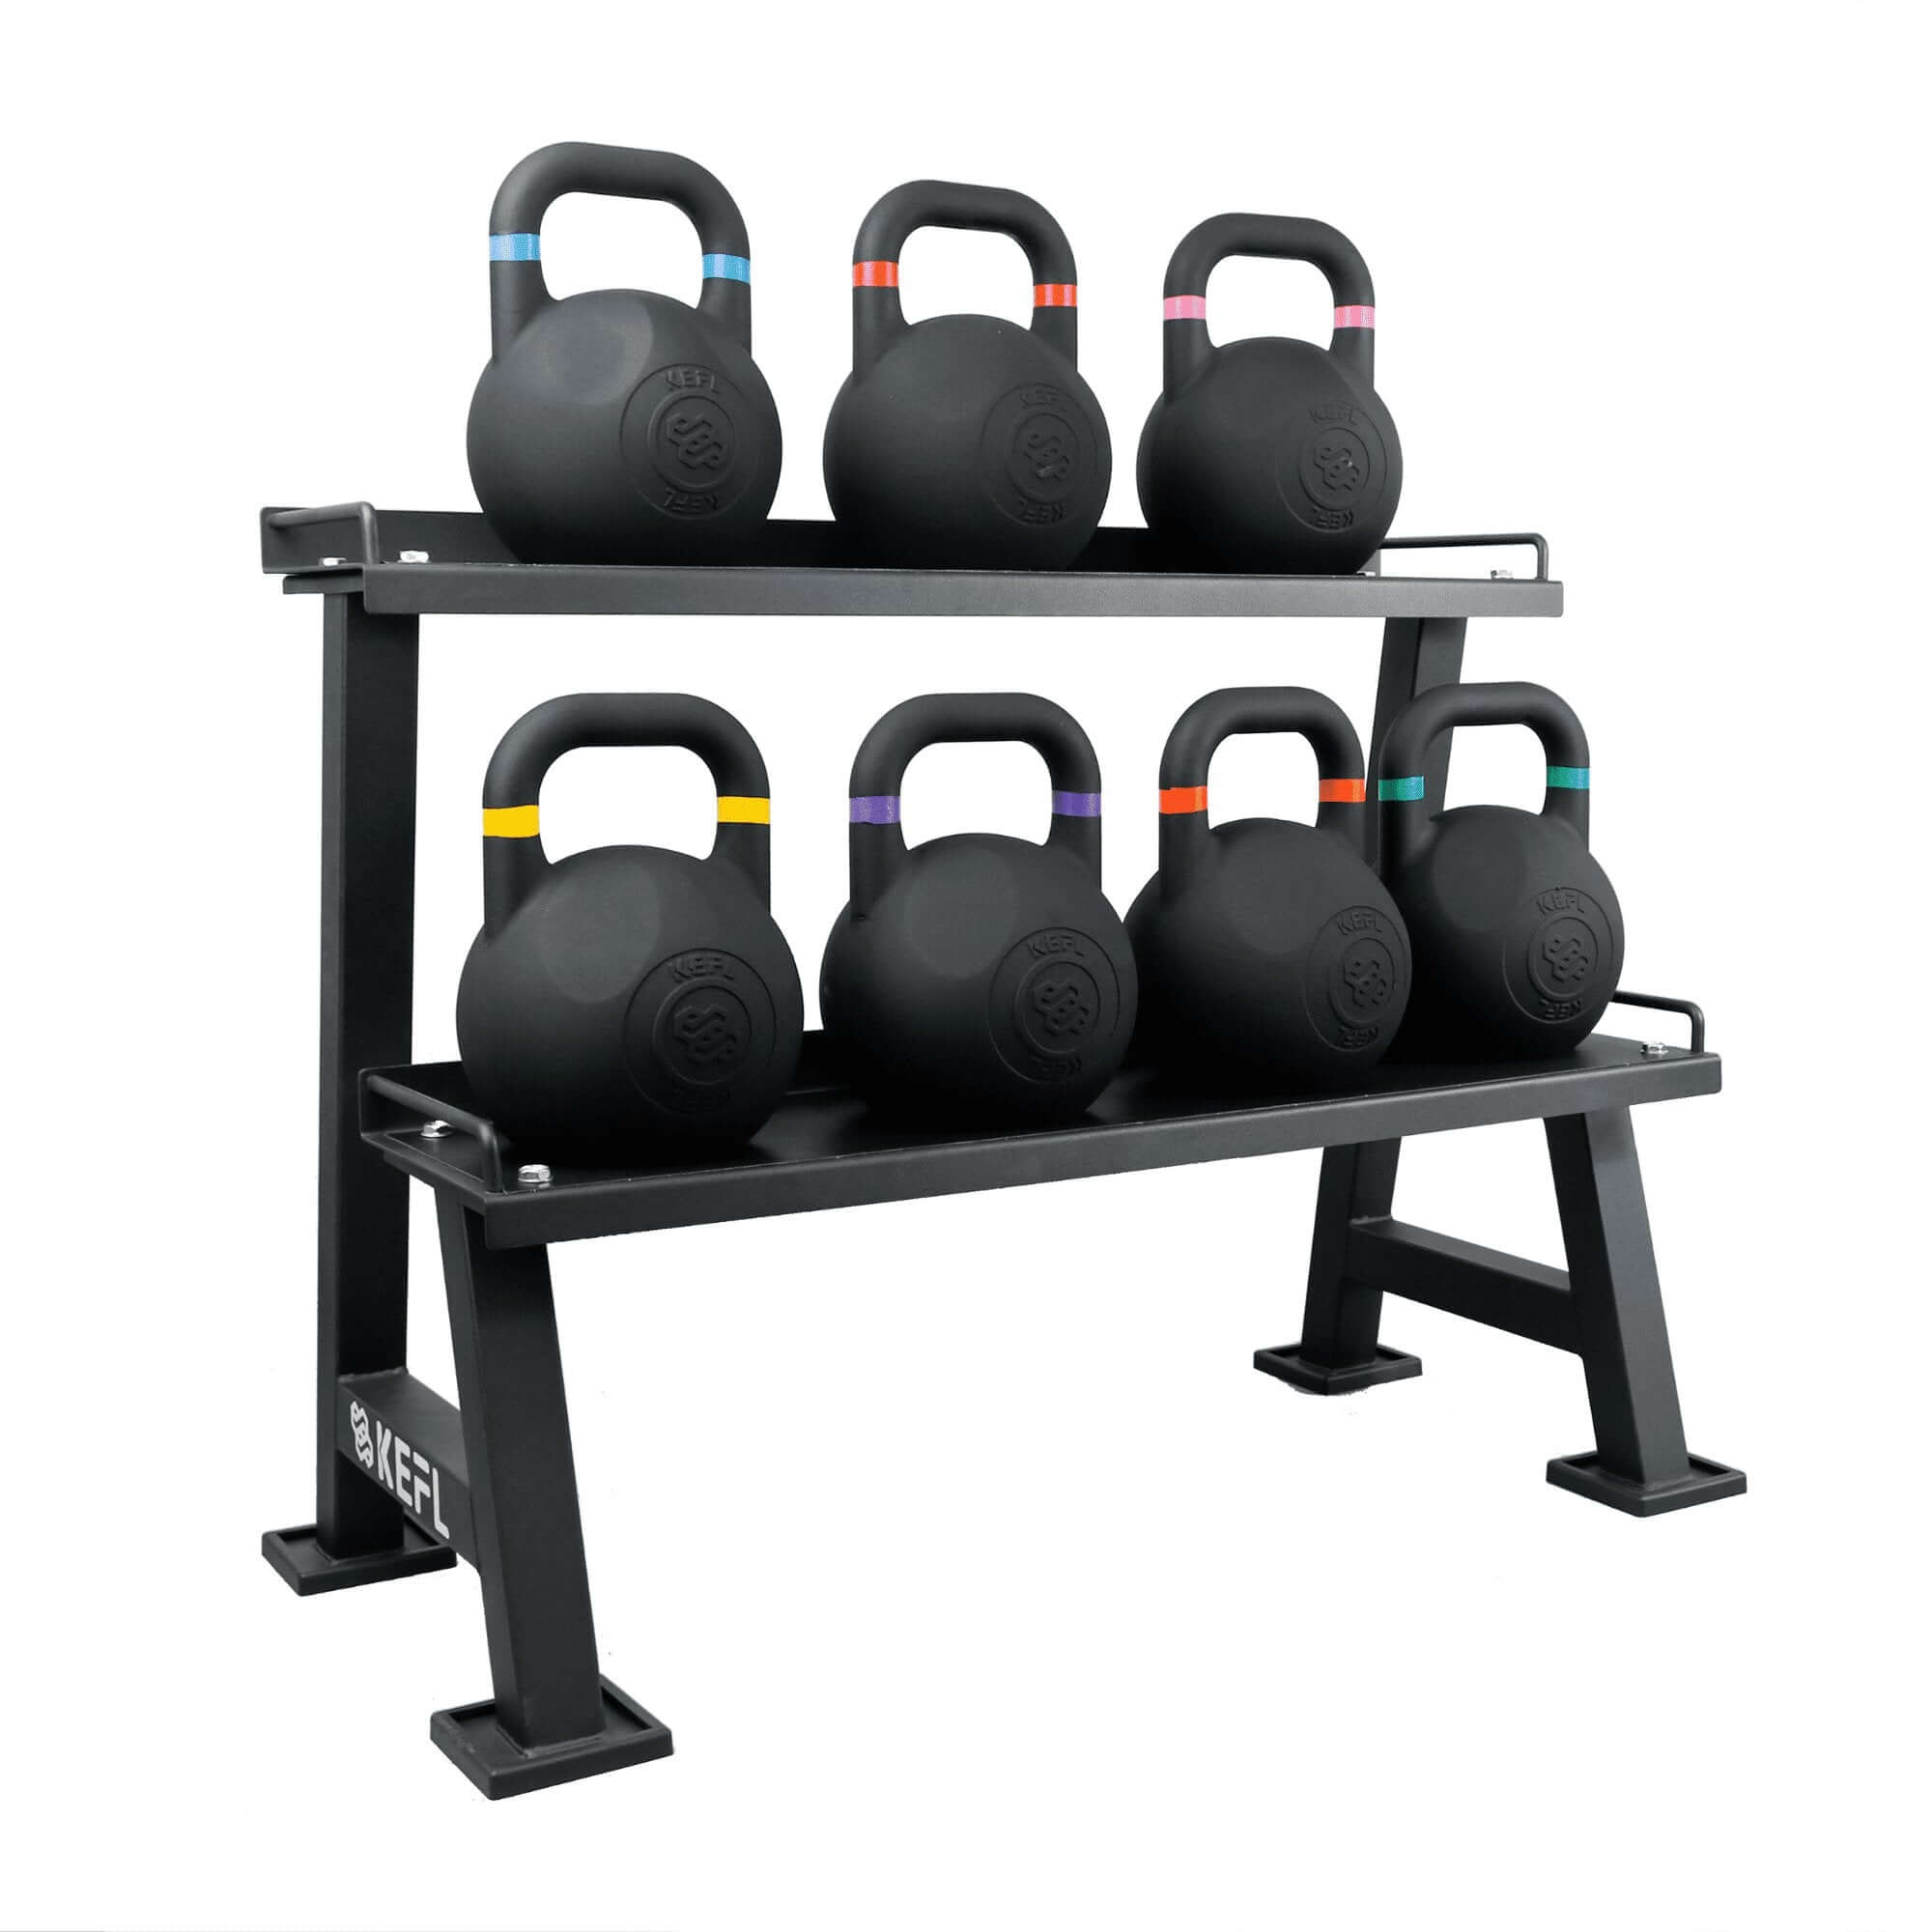 Competition Colour Coded Cast Iron Kettlebell - KEFLUK